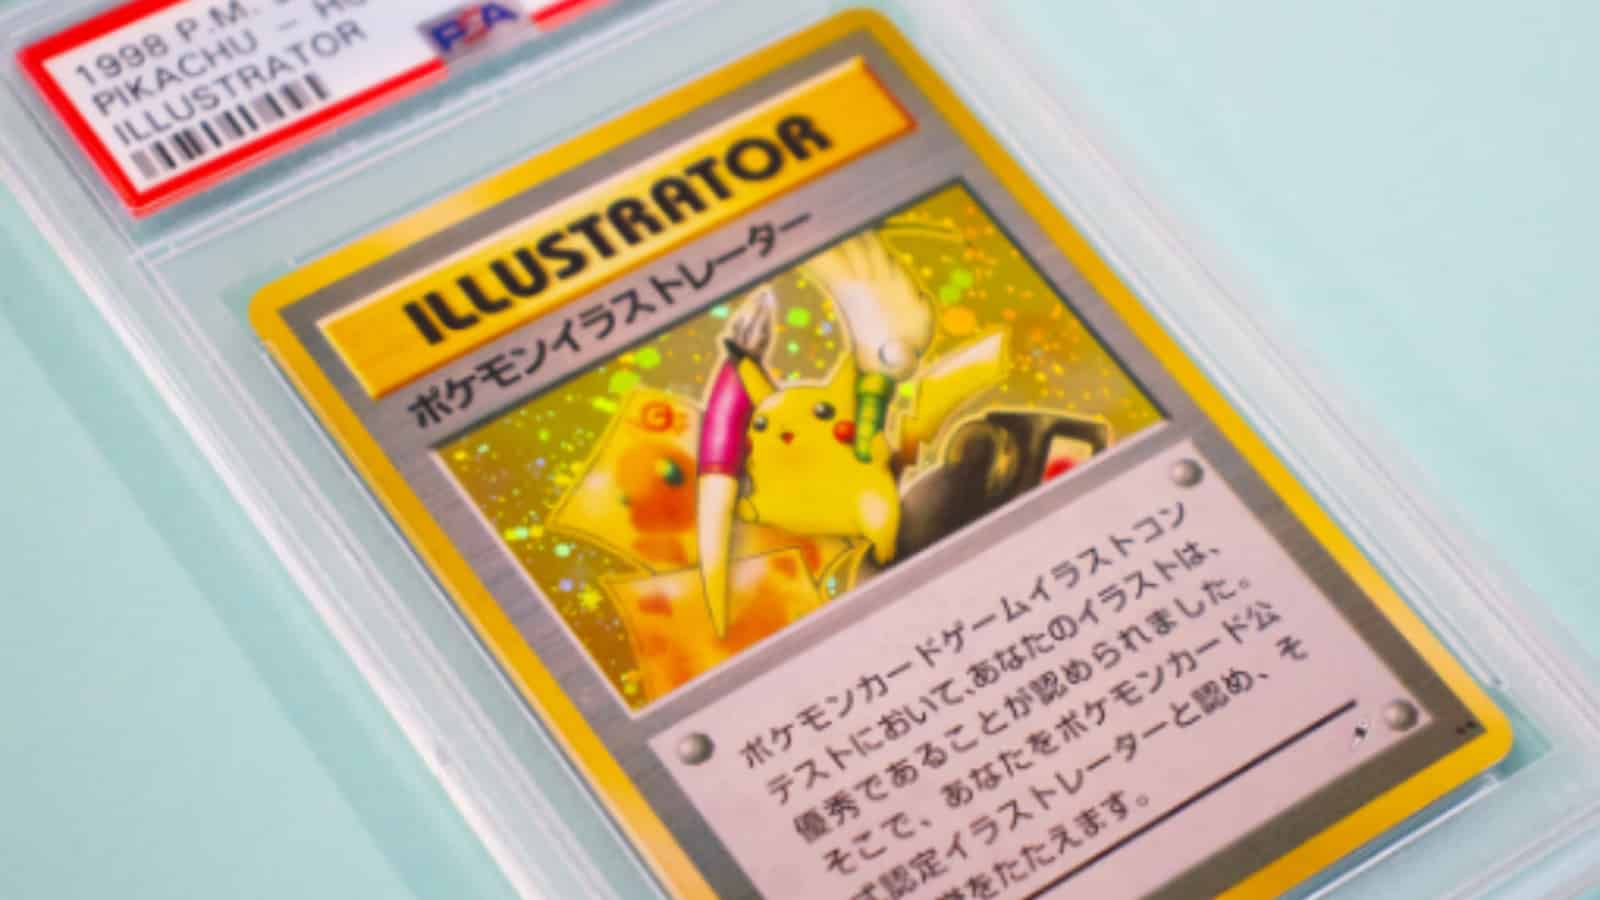 Epic Pokemon card breaks all-time record by fetching $900,000